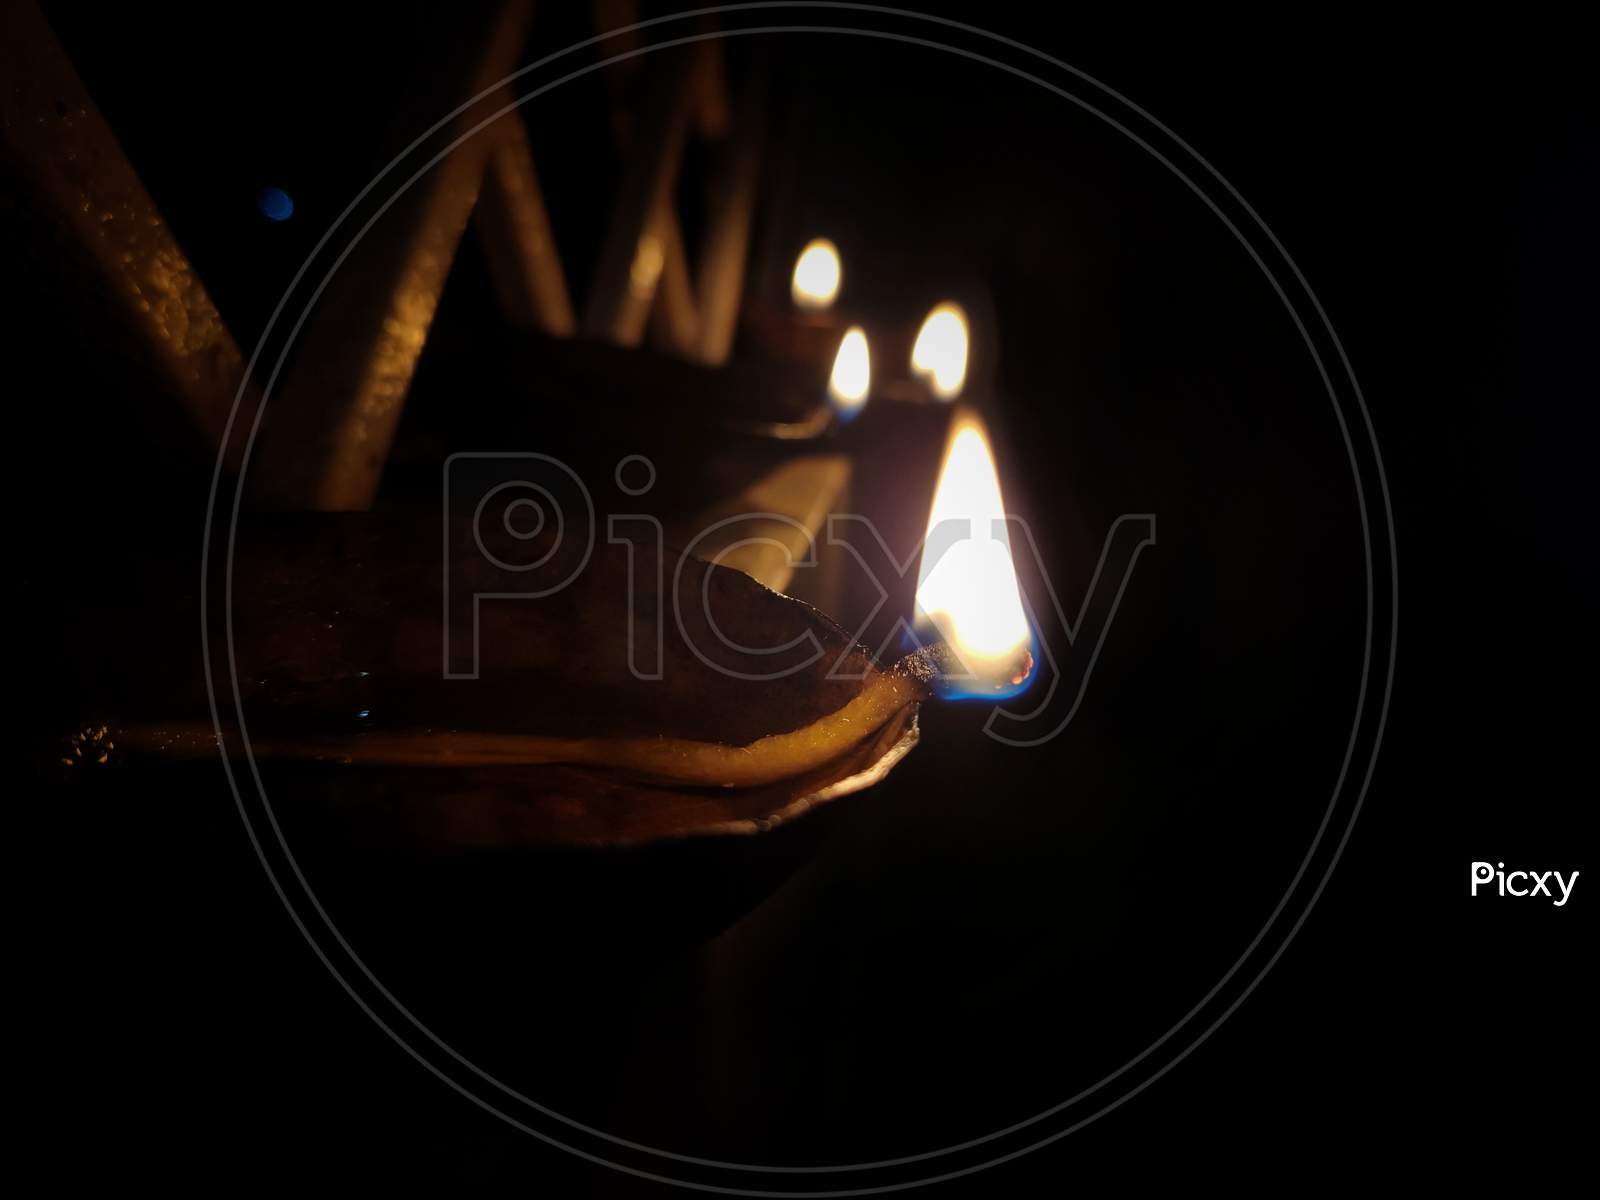 this is a picture of burning oil lamp in dark.